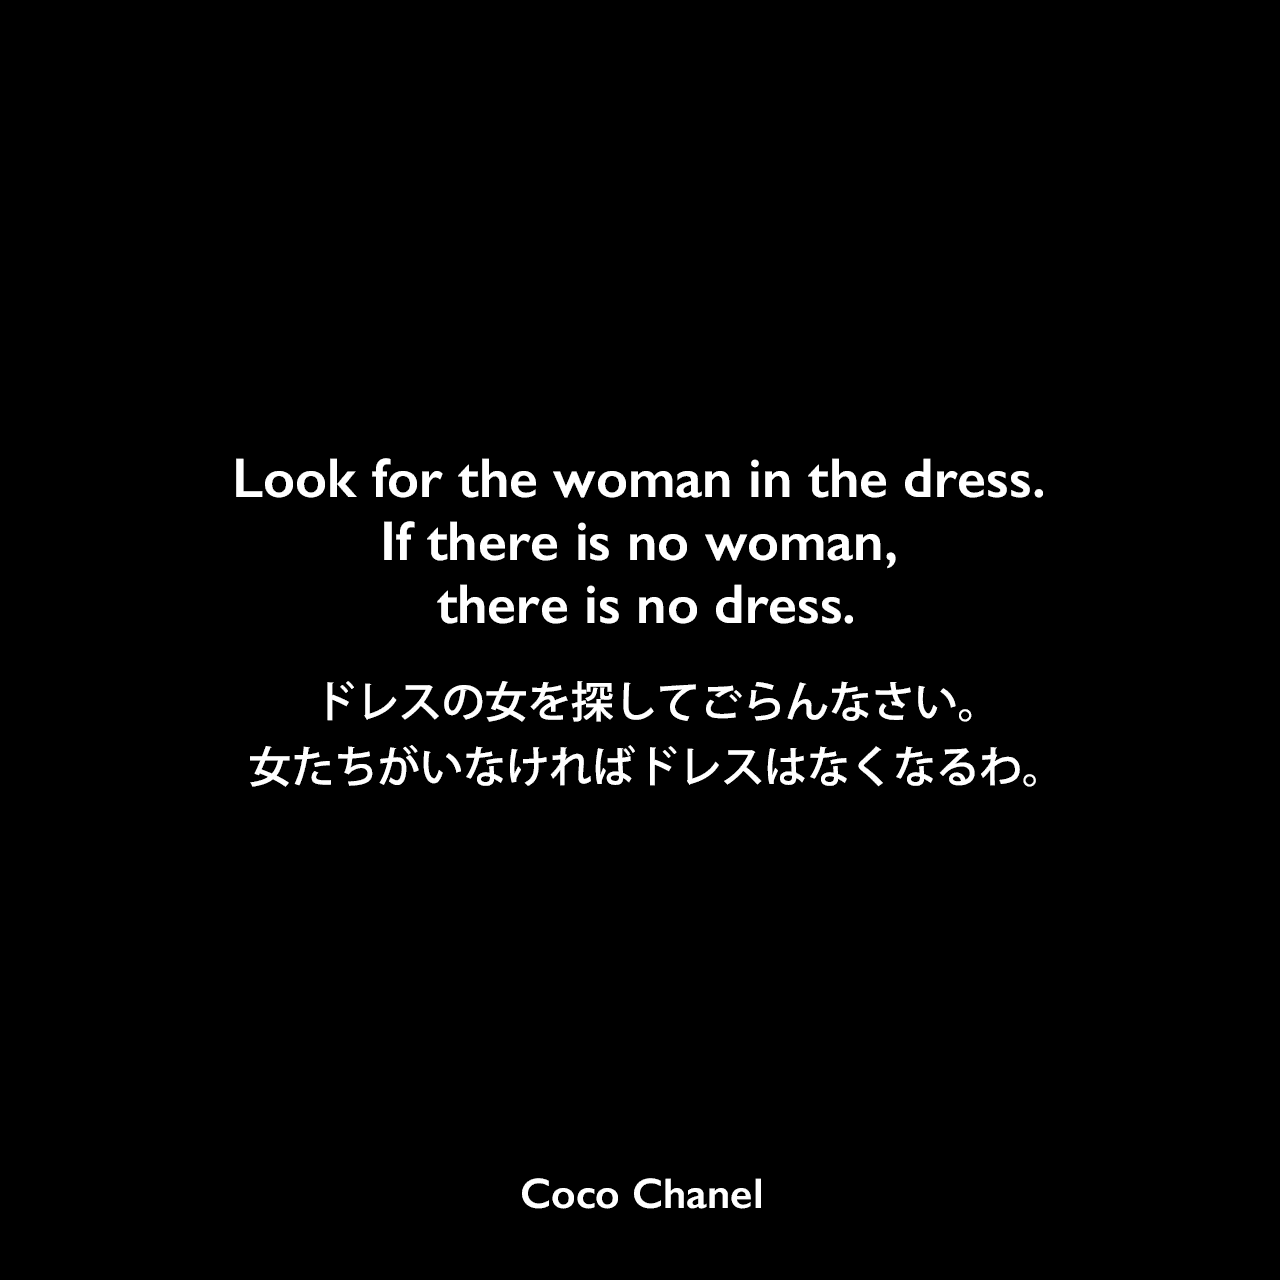 Look for the woman in the dress. If there is no woman, there is no dress.ドレスの女を探してごらんなさい。女たちがいなければドレスはなくなるわ。Coco Chanel